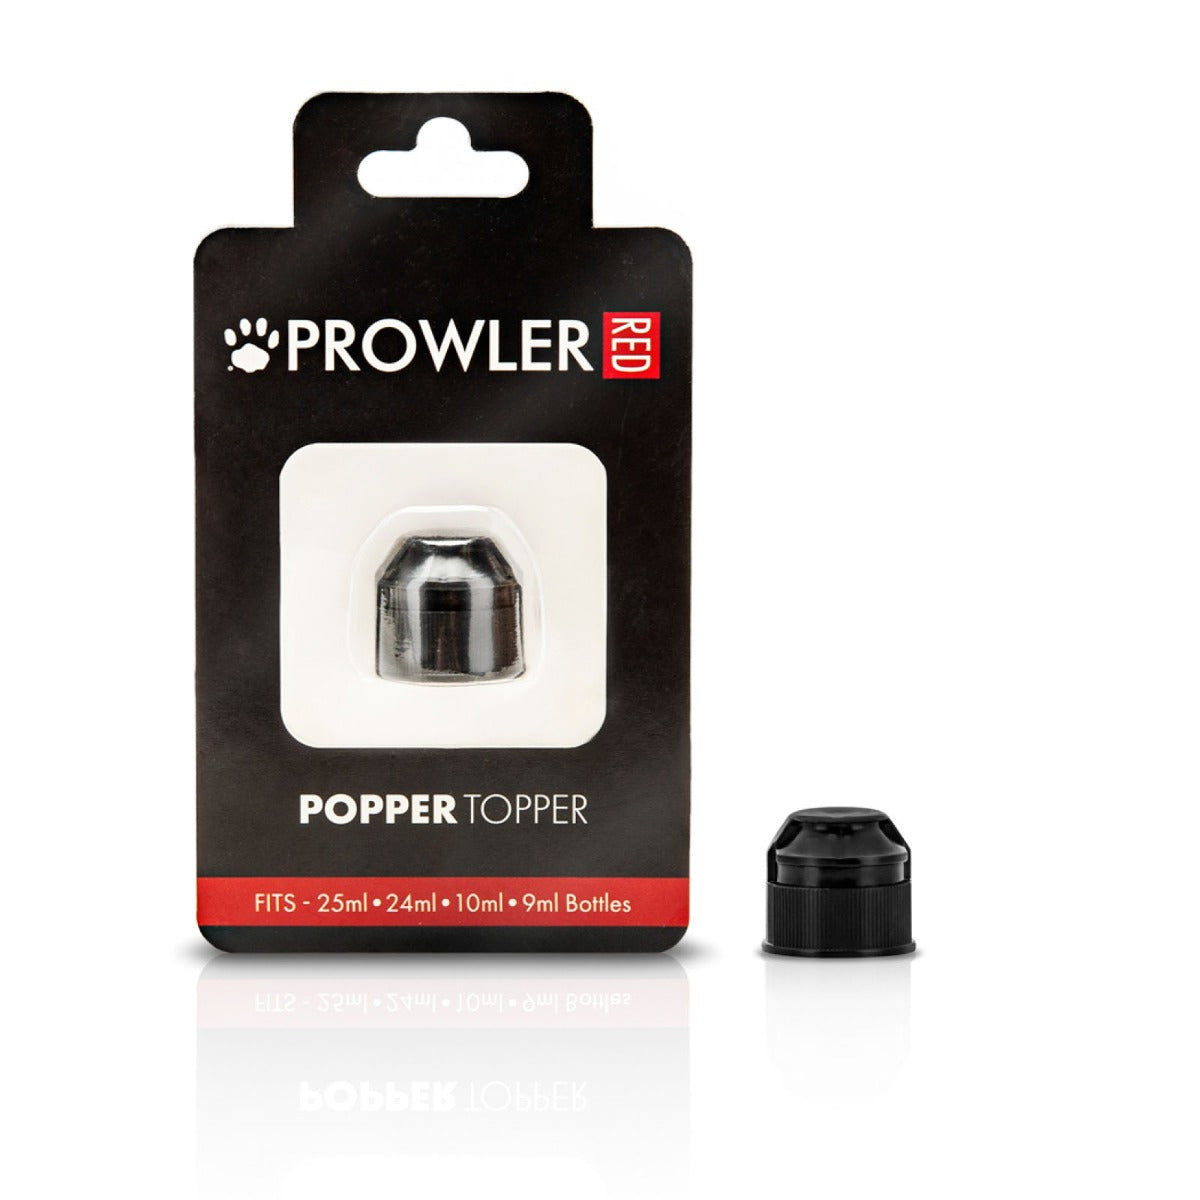 Fisting Cream & Anal Relaxants Prowler RED Popper Topper   